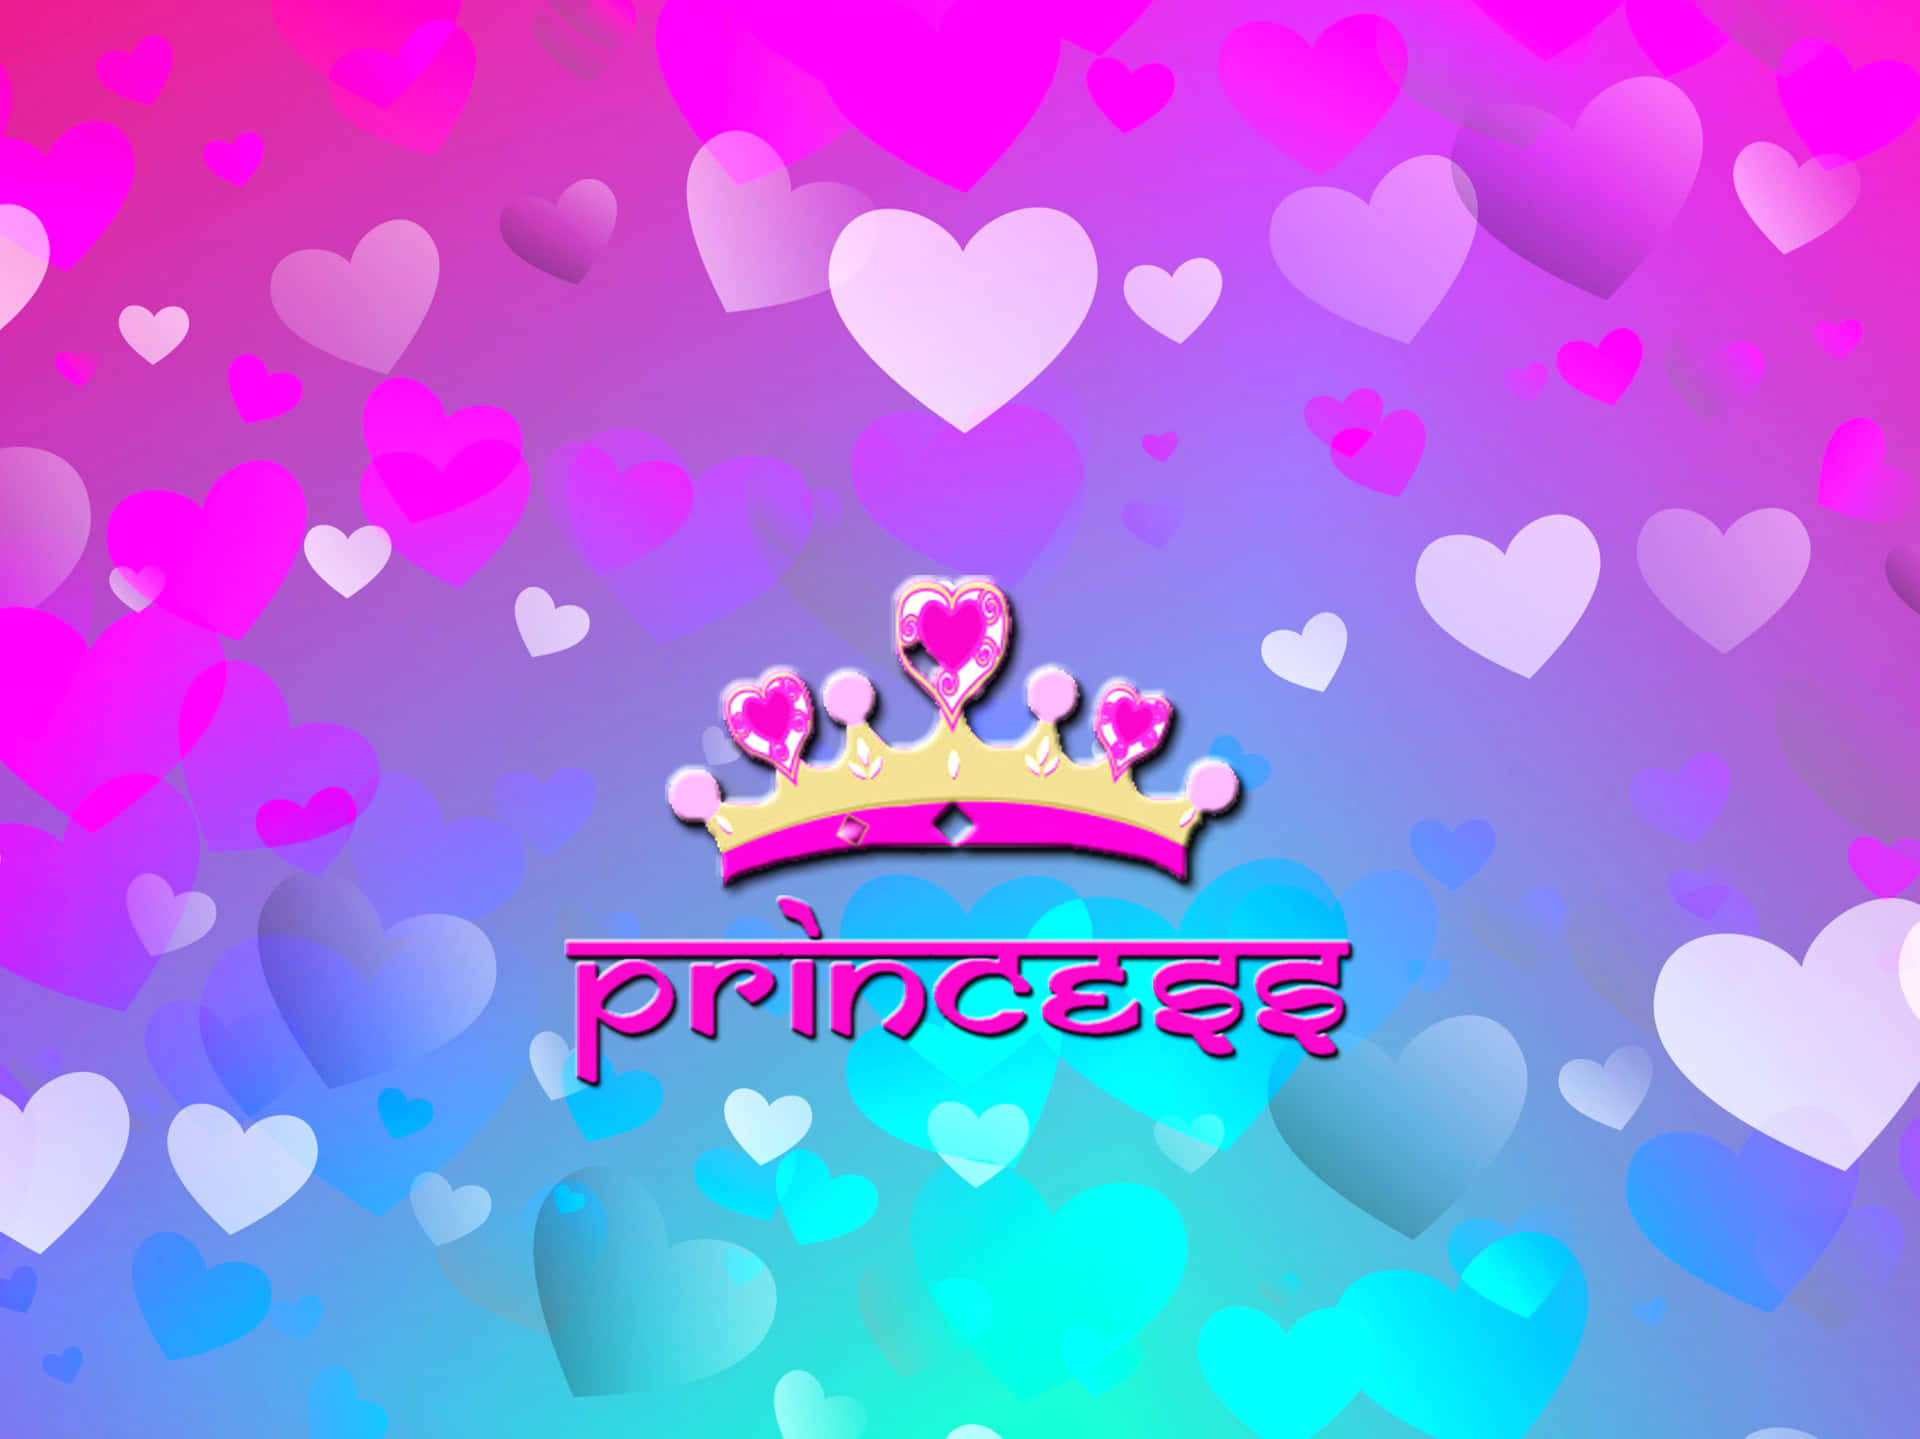 A Beautiful Princess Crown Adorned With Colorful Rhinestones. Background